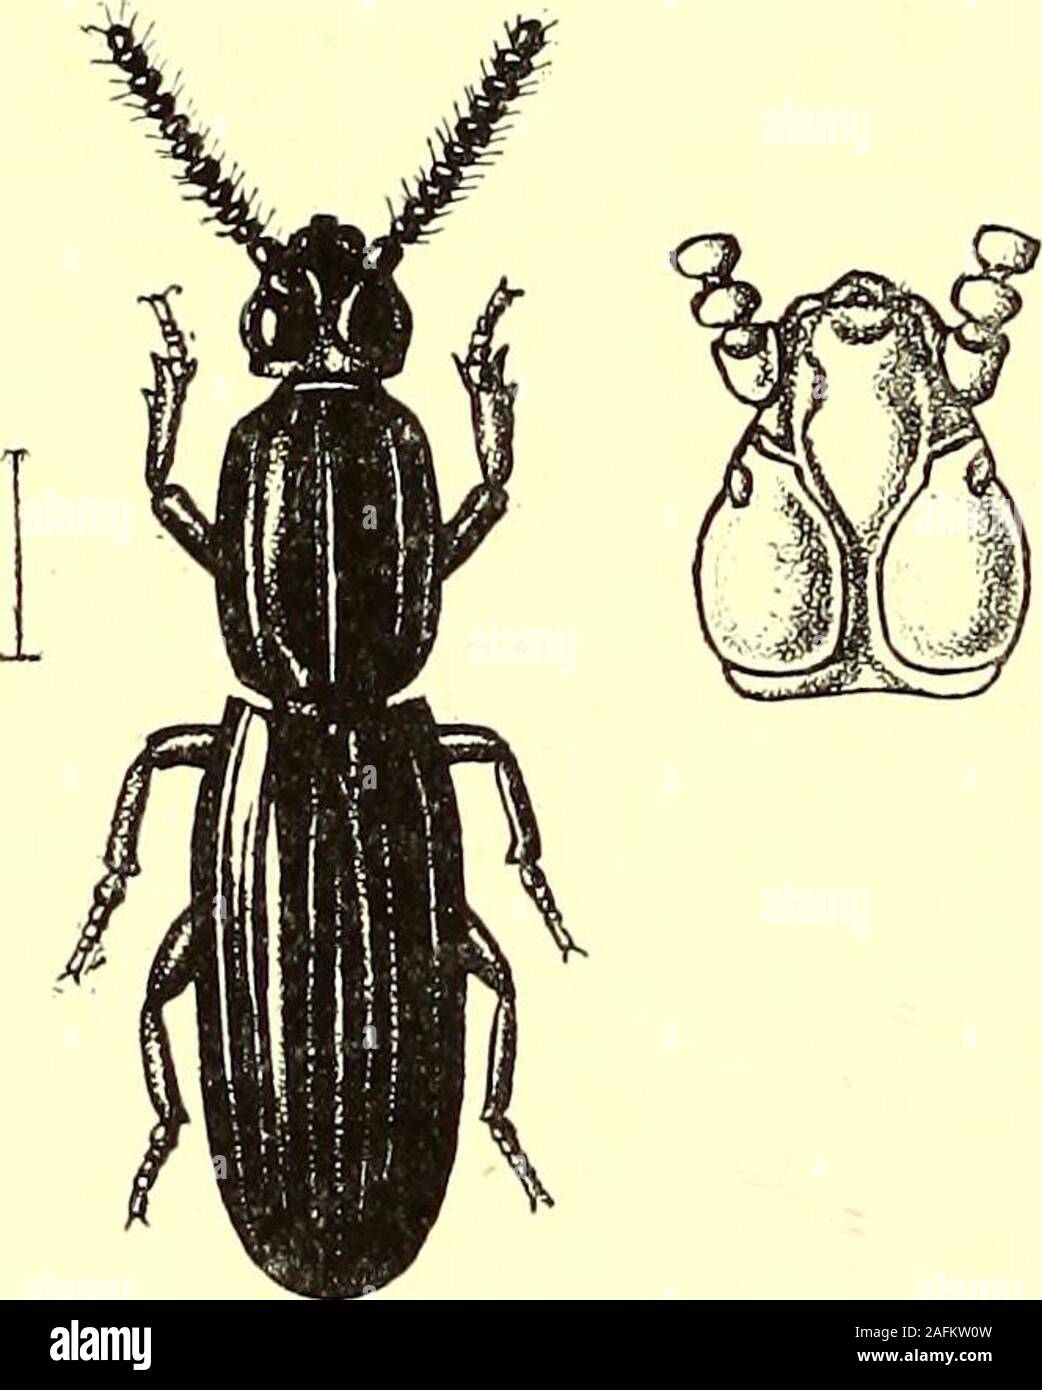 . Coleoptera : general introduction and Cicindelidae and Paussidae. cuminate atits apex ; head subtriangular, withthe posterior lobes large, prominent,and smooth, separated by a narrowchannel which is bifurcate in front,the two furrows embracing the basalportion of a rather large lance-head-shaped smooth space ; prothorax long,oblong, with the central and side fur-rows well marked and entire and with239. two strong basal impressions between Clinidium waterhousei. the central and side furrows, centralfurrow a little impressed, but notexcavate, at the posterior third ; elytra very deeply impress Stock Photo